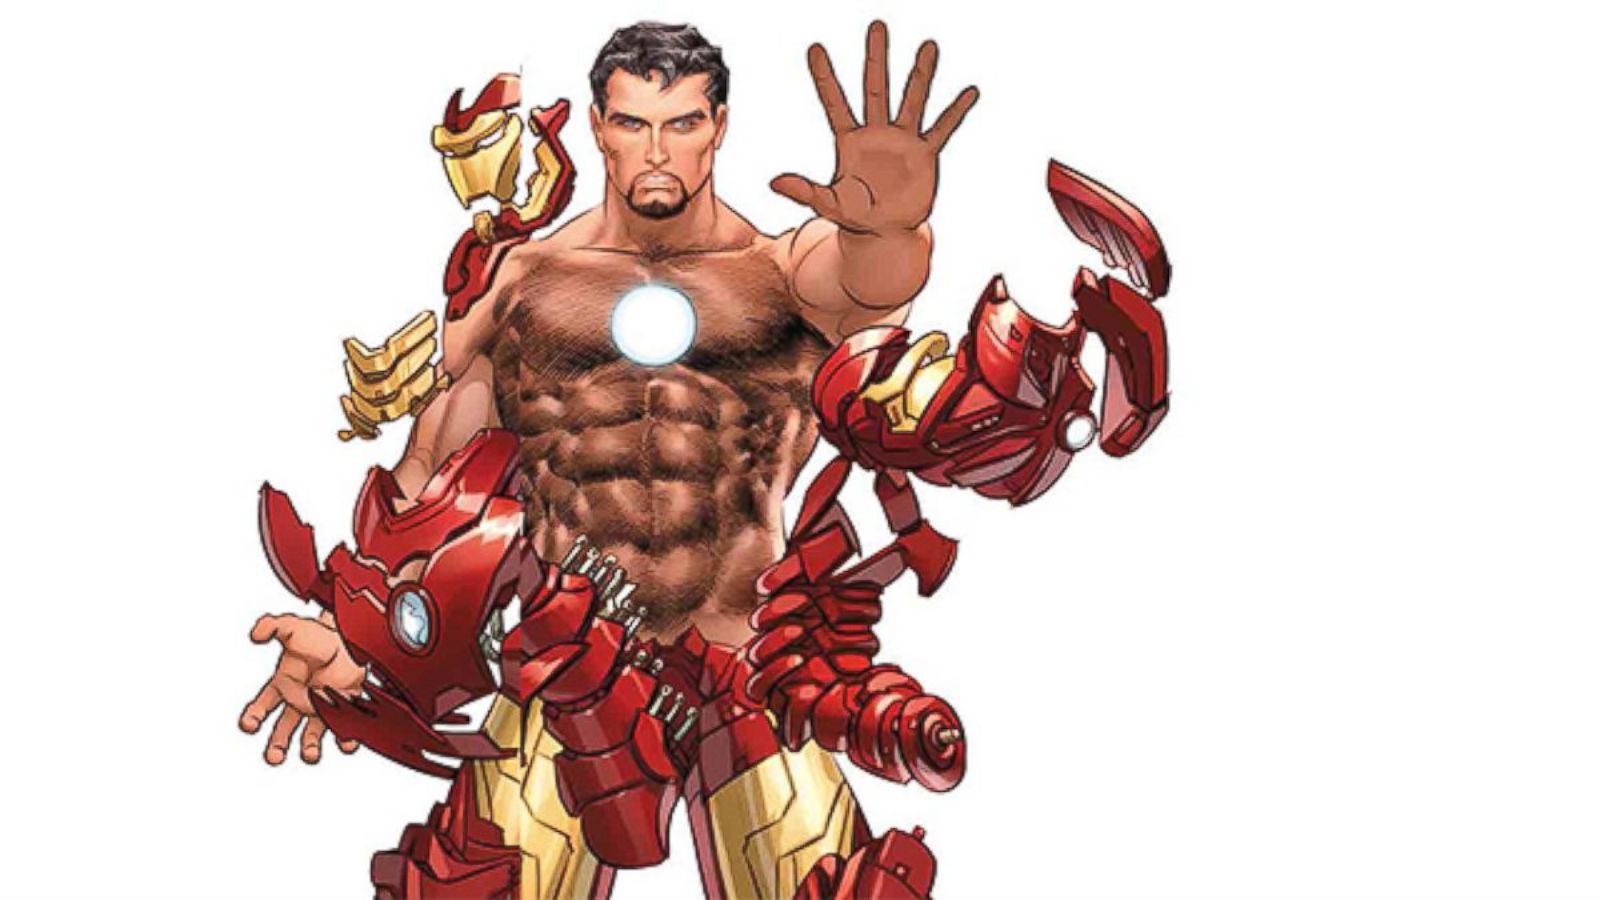 See Your Favorite Marvel Super Heroes Naked for ESPN Body Issue - ABC News